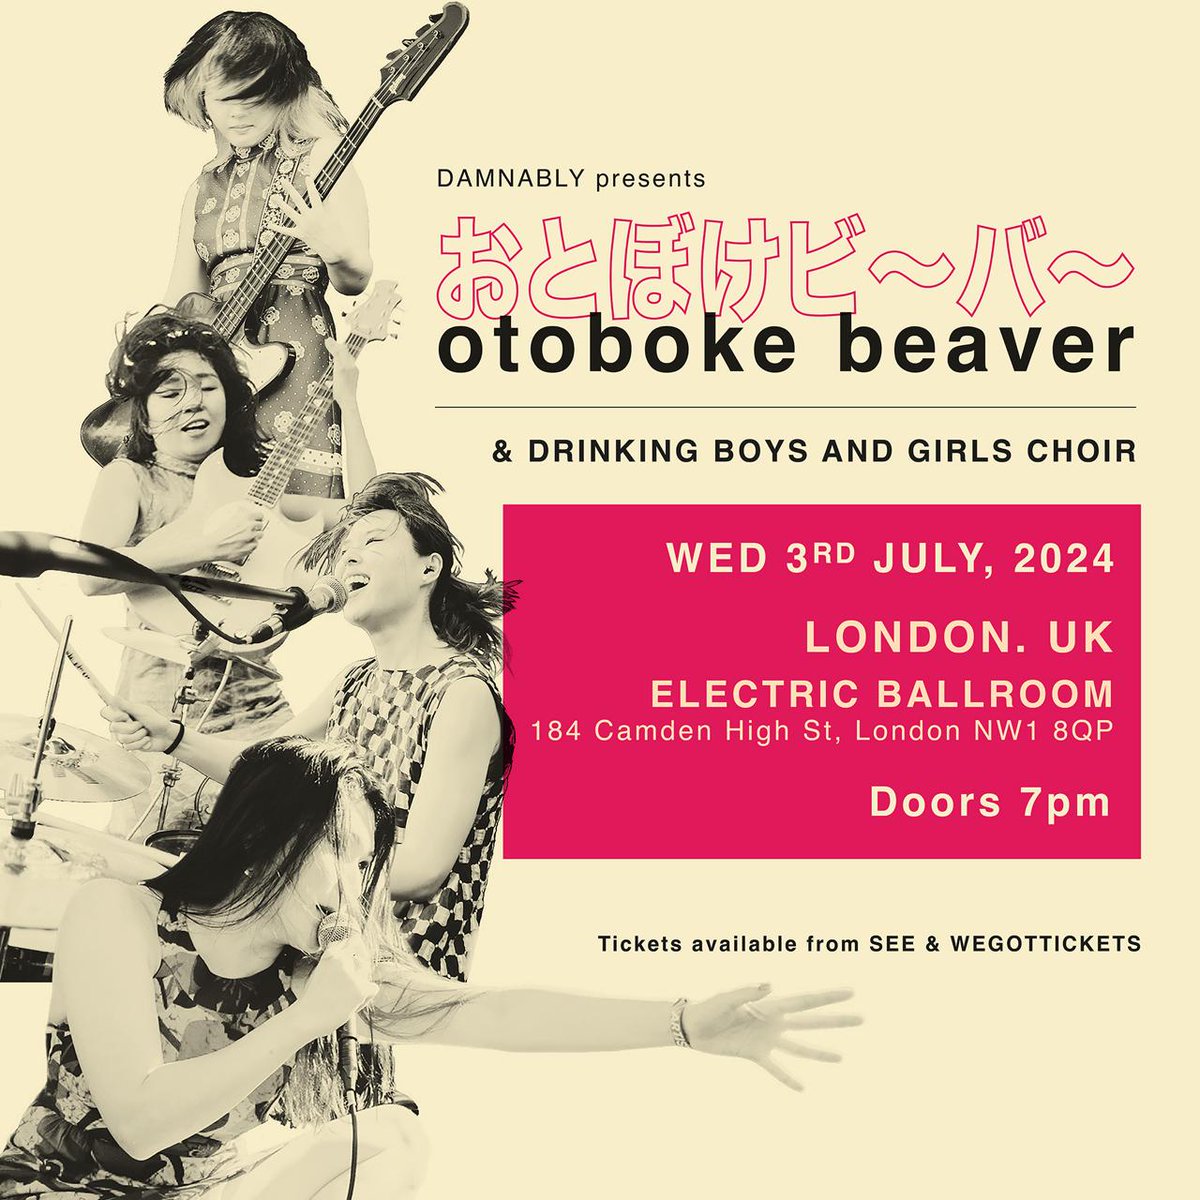 LONDON!!! Tickets over half way sold now. Don't miss your summer chance to catch @otobokebeaver & @BandDBGC at the @EBallroomCamden July 3rd. Get Yr Tix now!! seetickets.com/event/damnably…